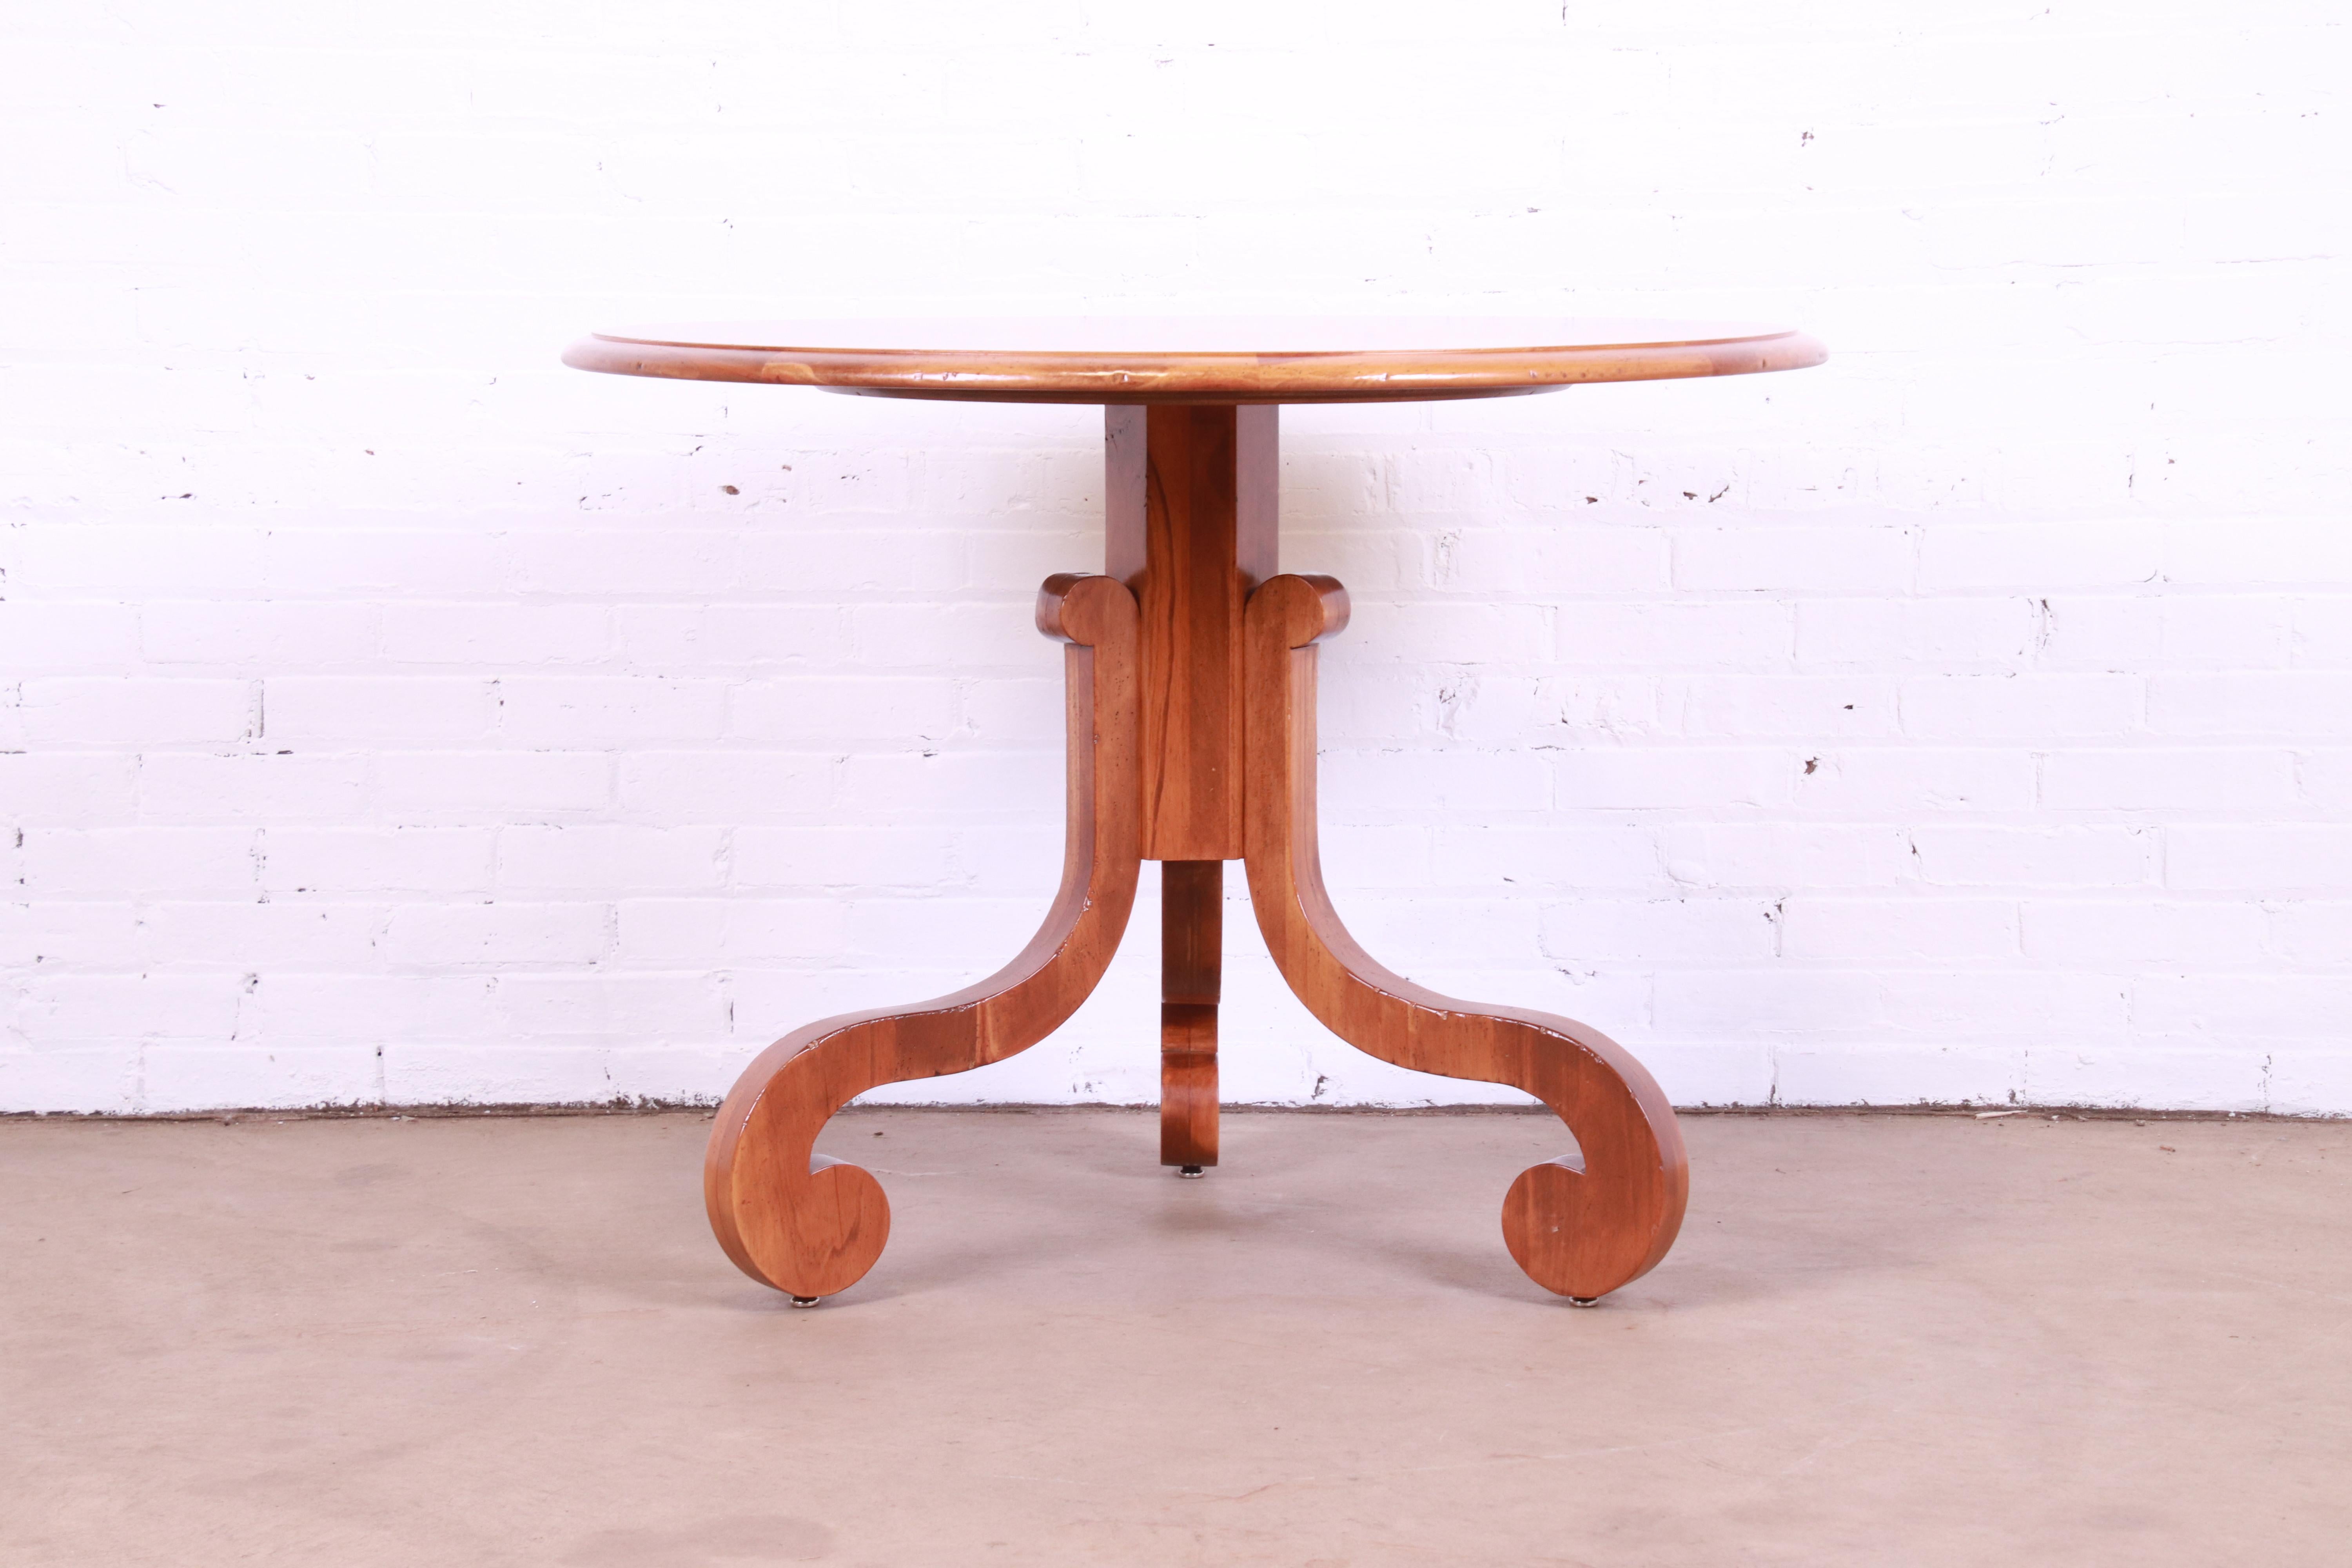 A gorgeous French Empire style fruitwood pedestal breakfast table or center table

By Baker Furniture, 